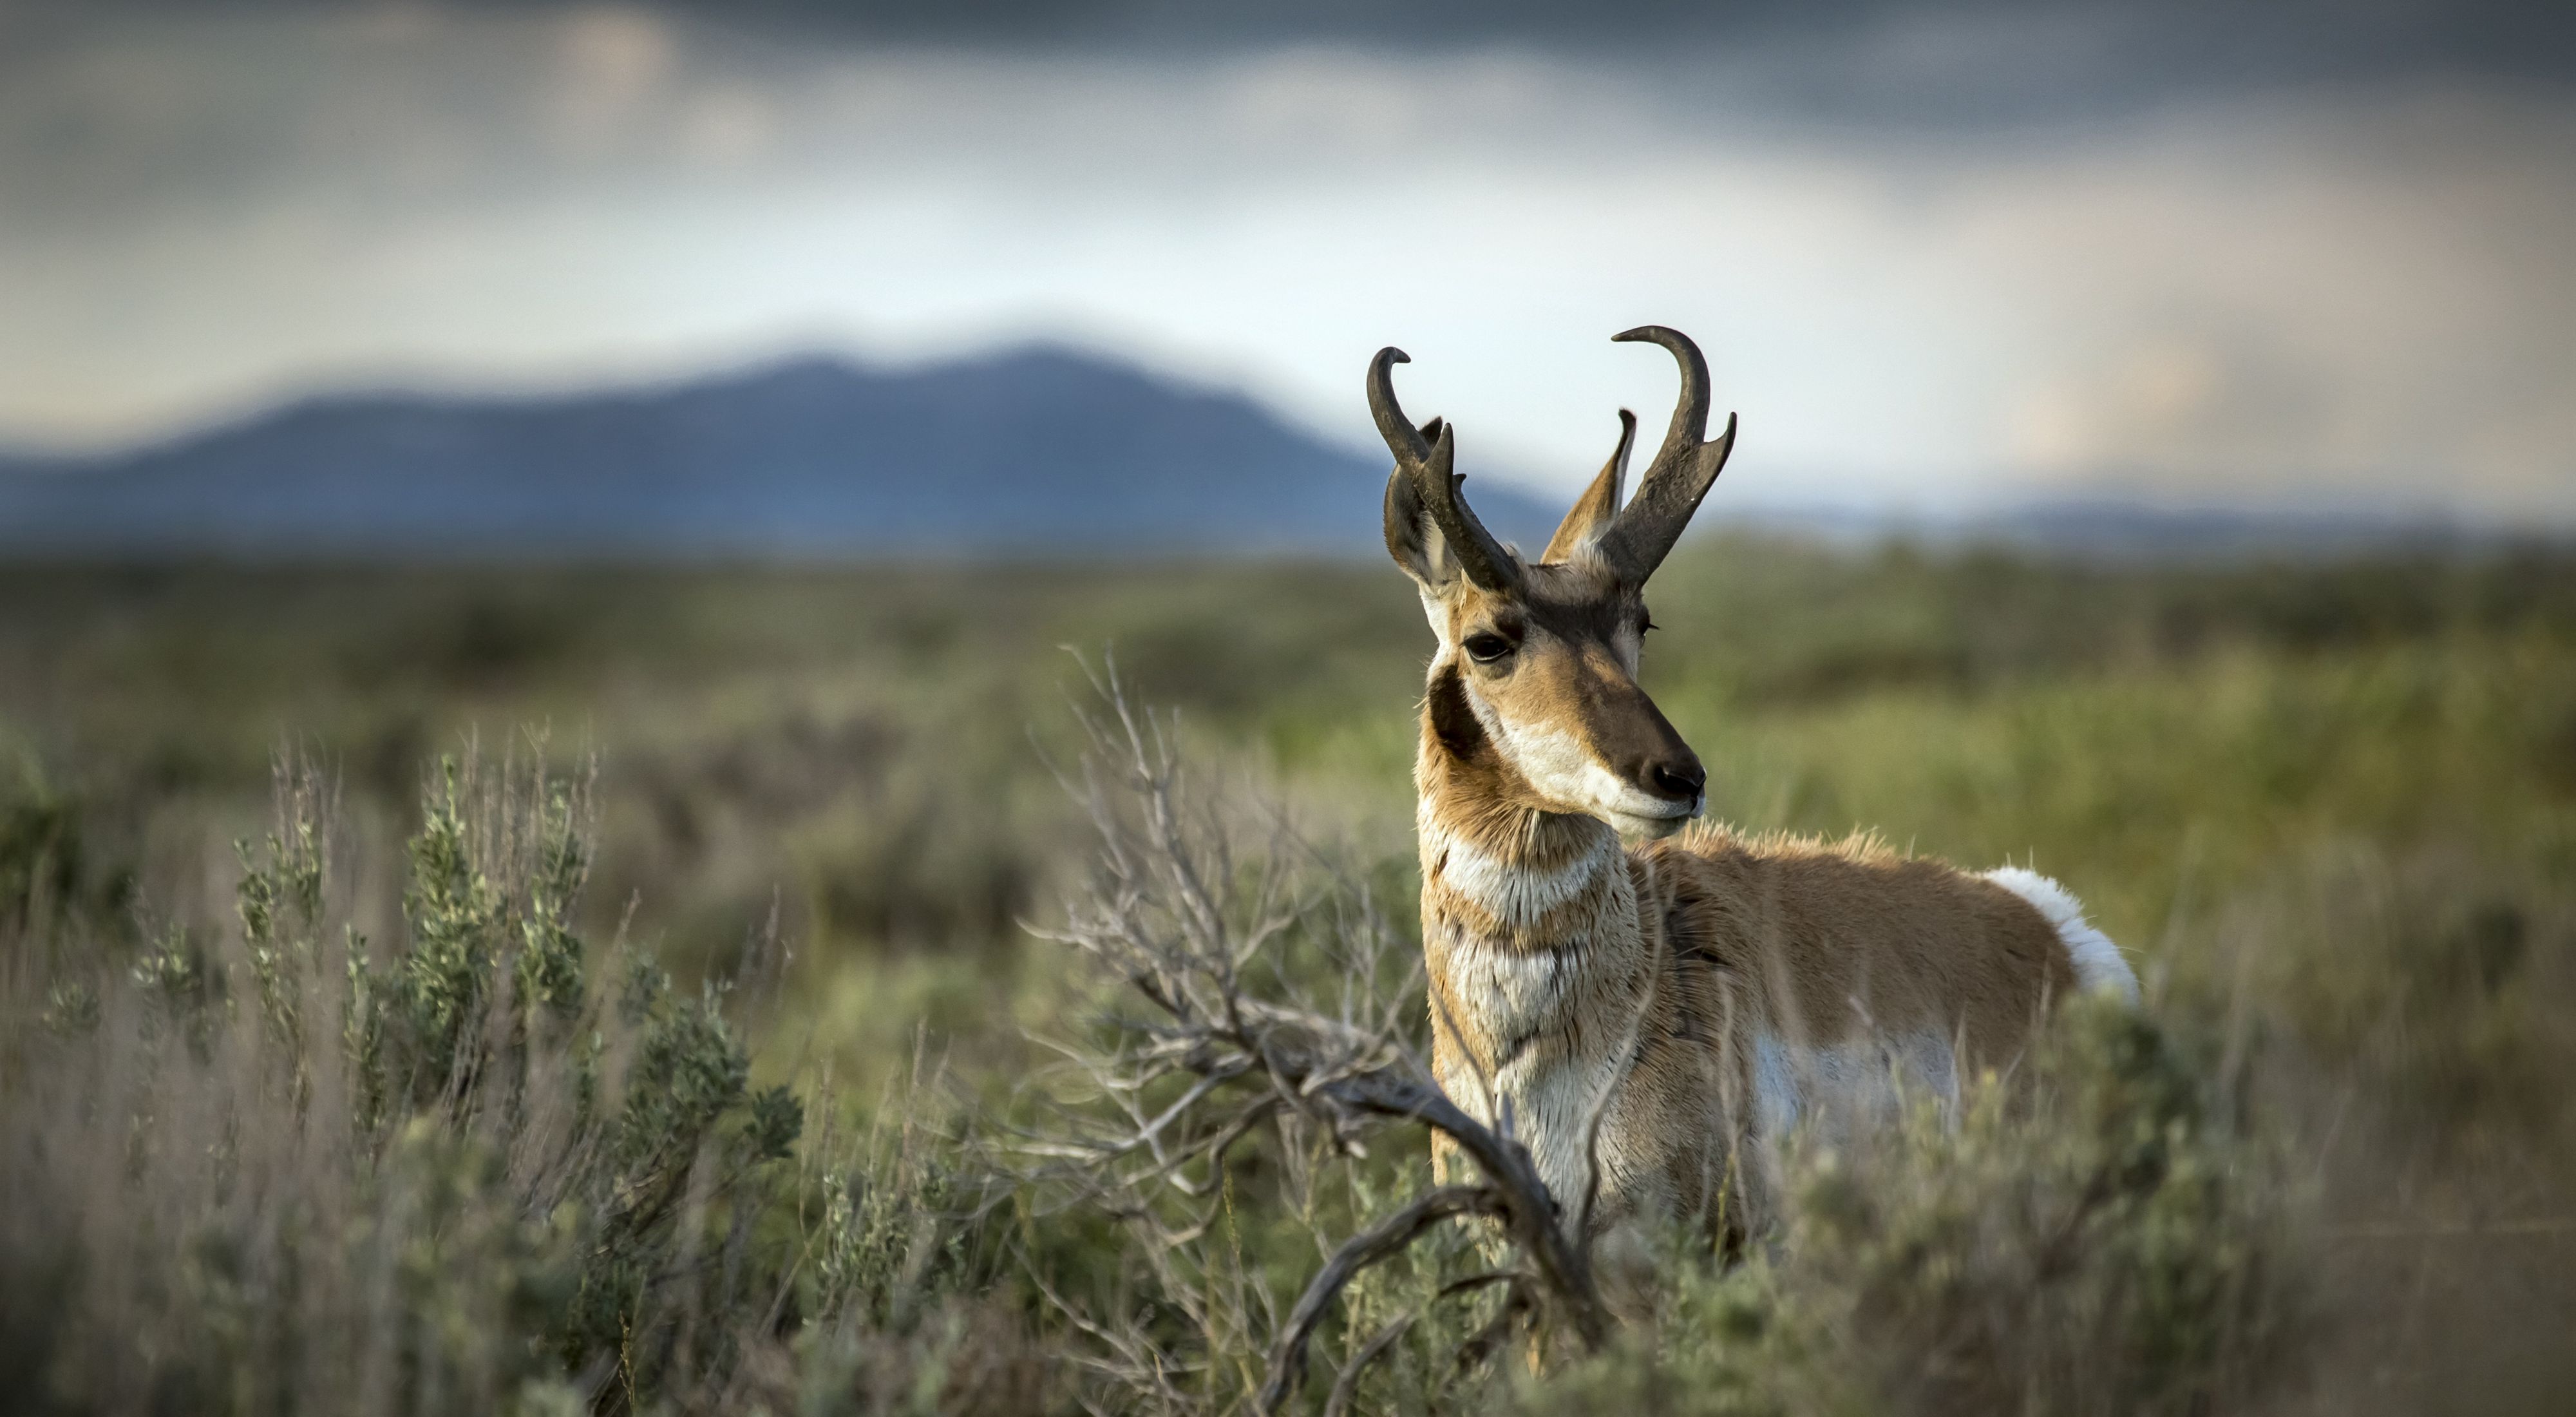 Closeup of a pronghorn standing in a grassy field.